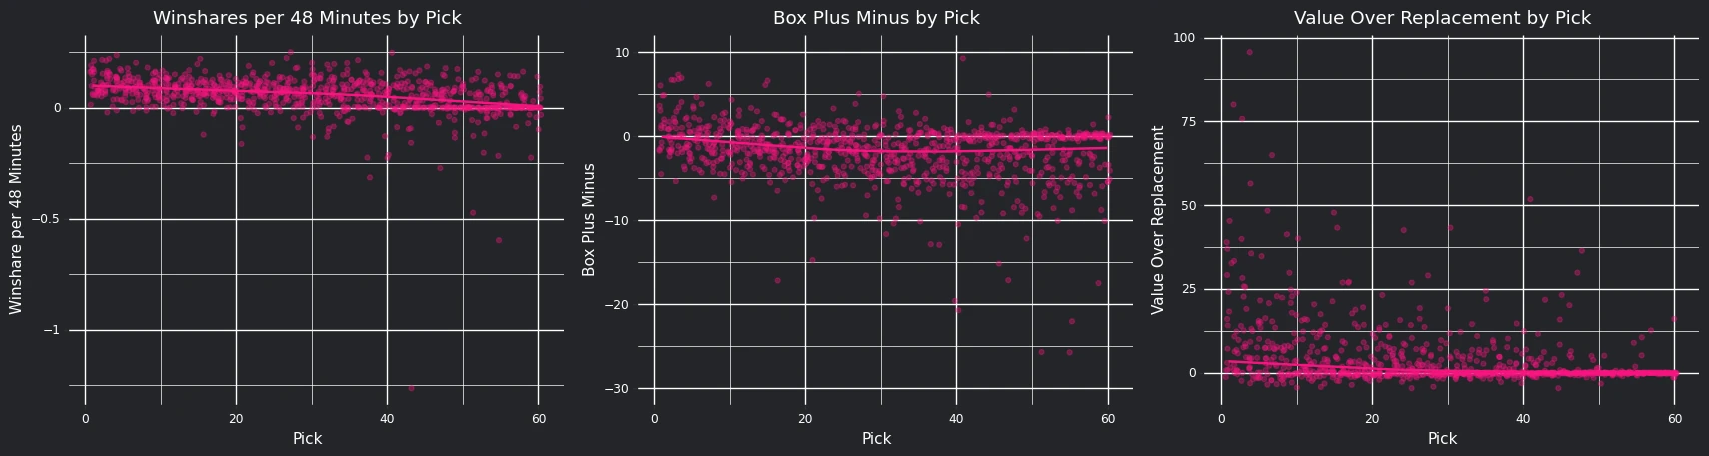 Graph displaying the the winshares per 48 minutes, box plus minus, and value over replacement over the player's pick